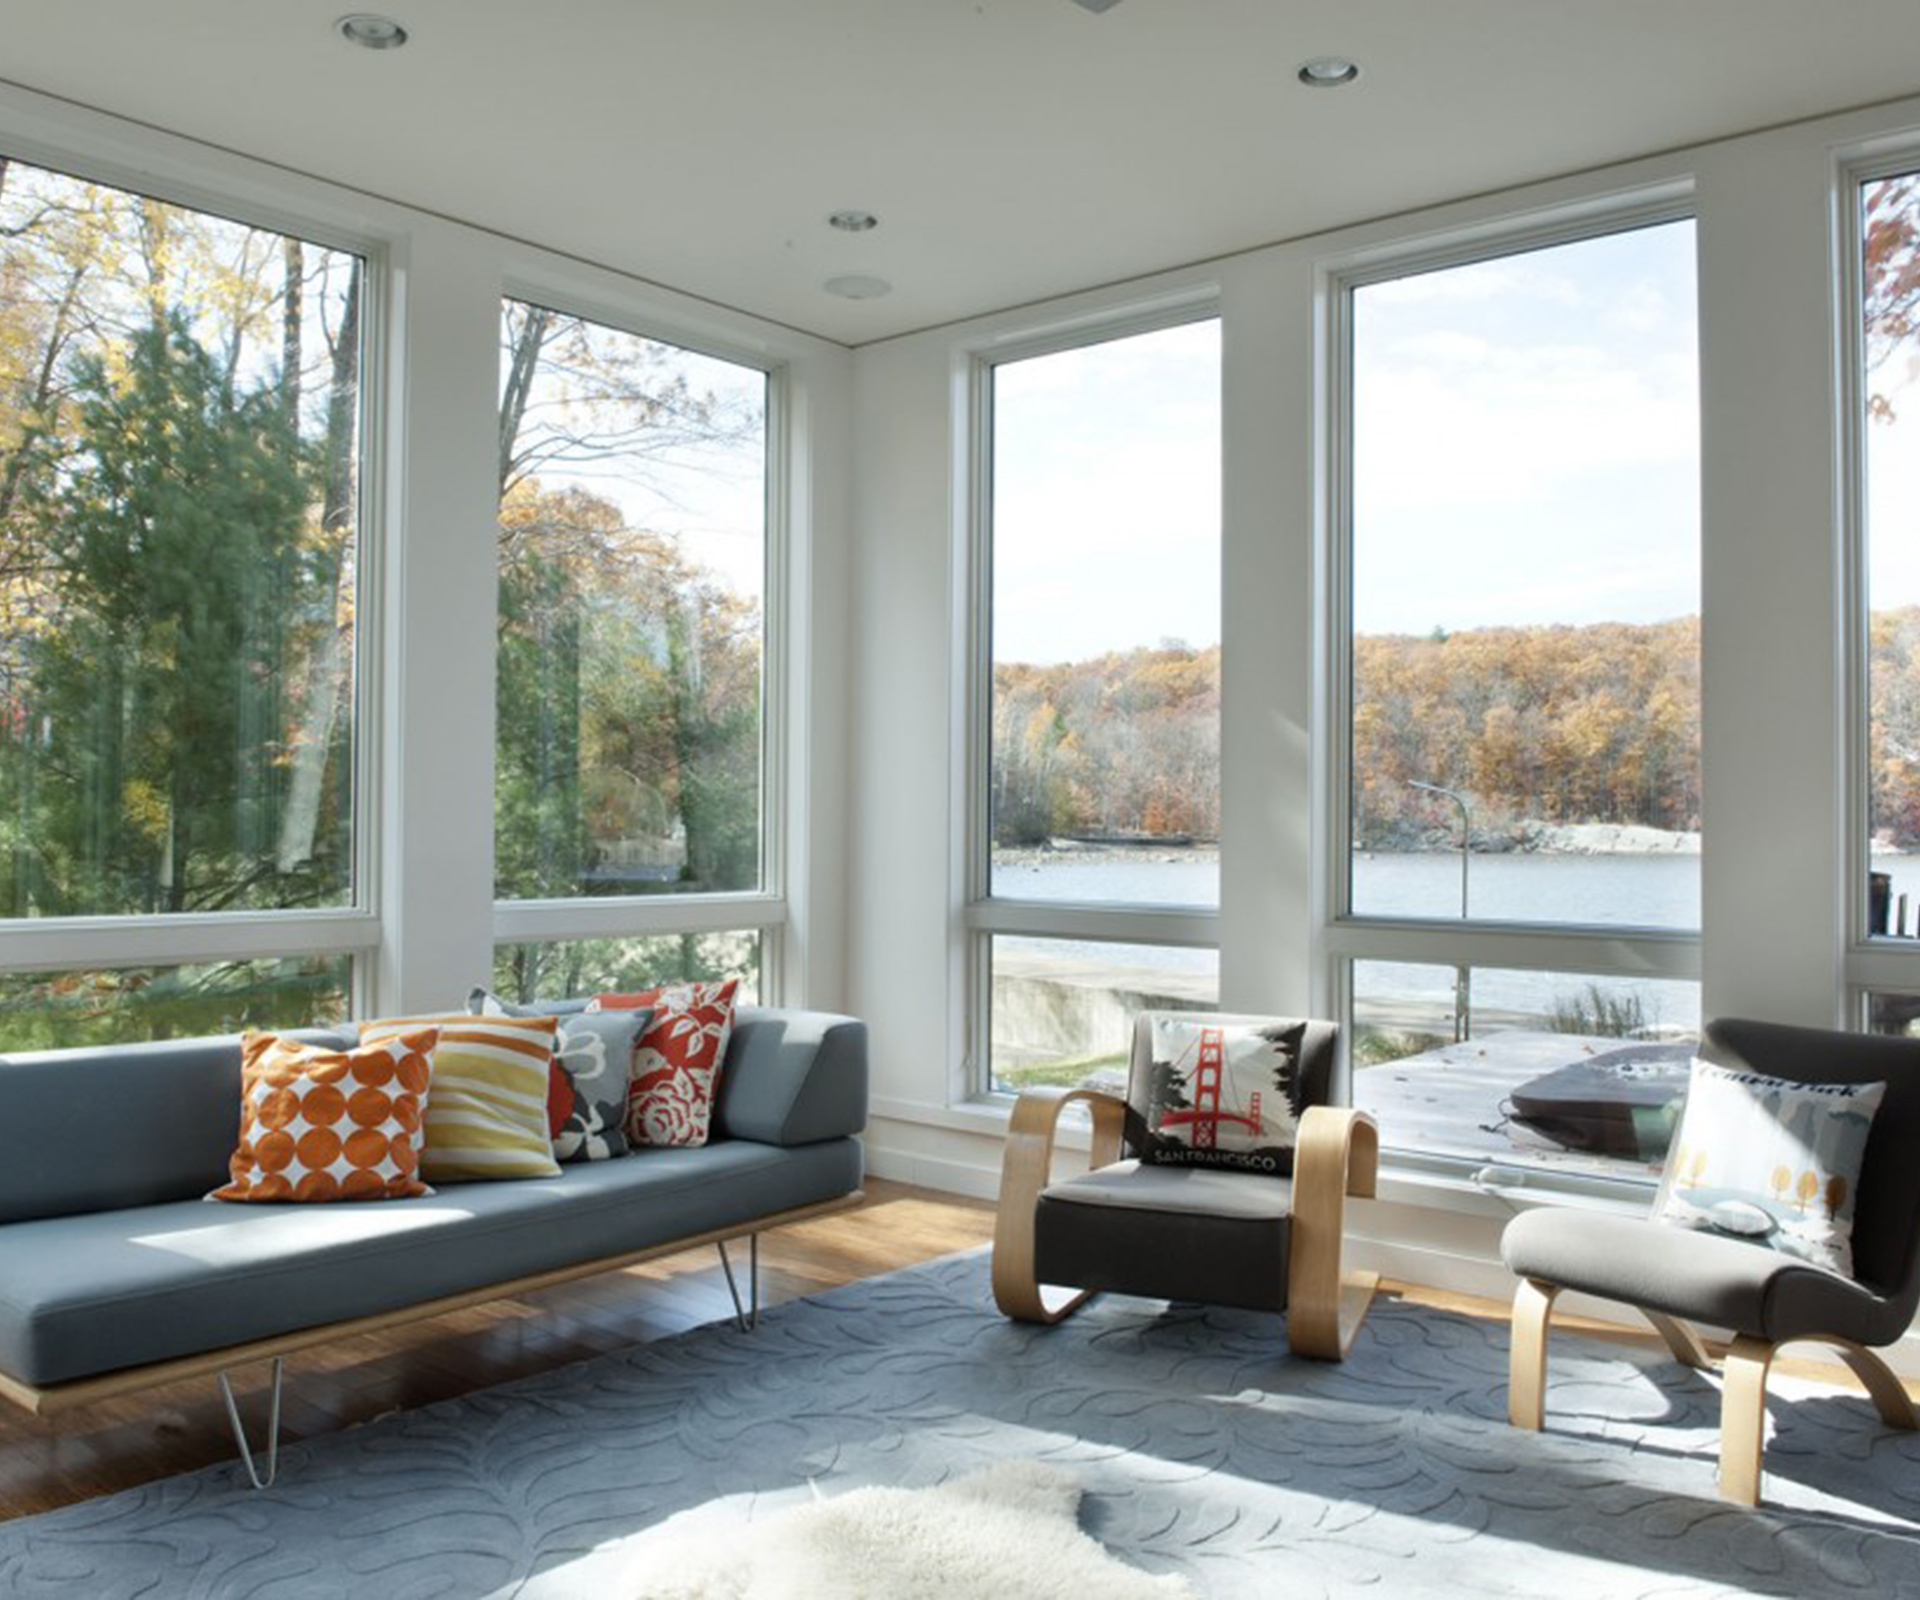 A view of the lake from the home's living room.